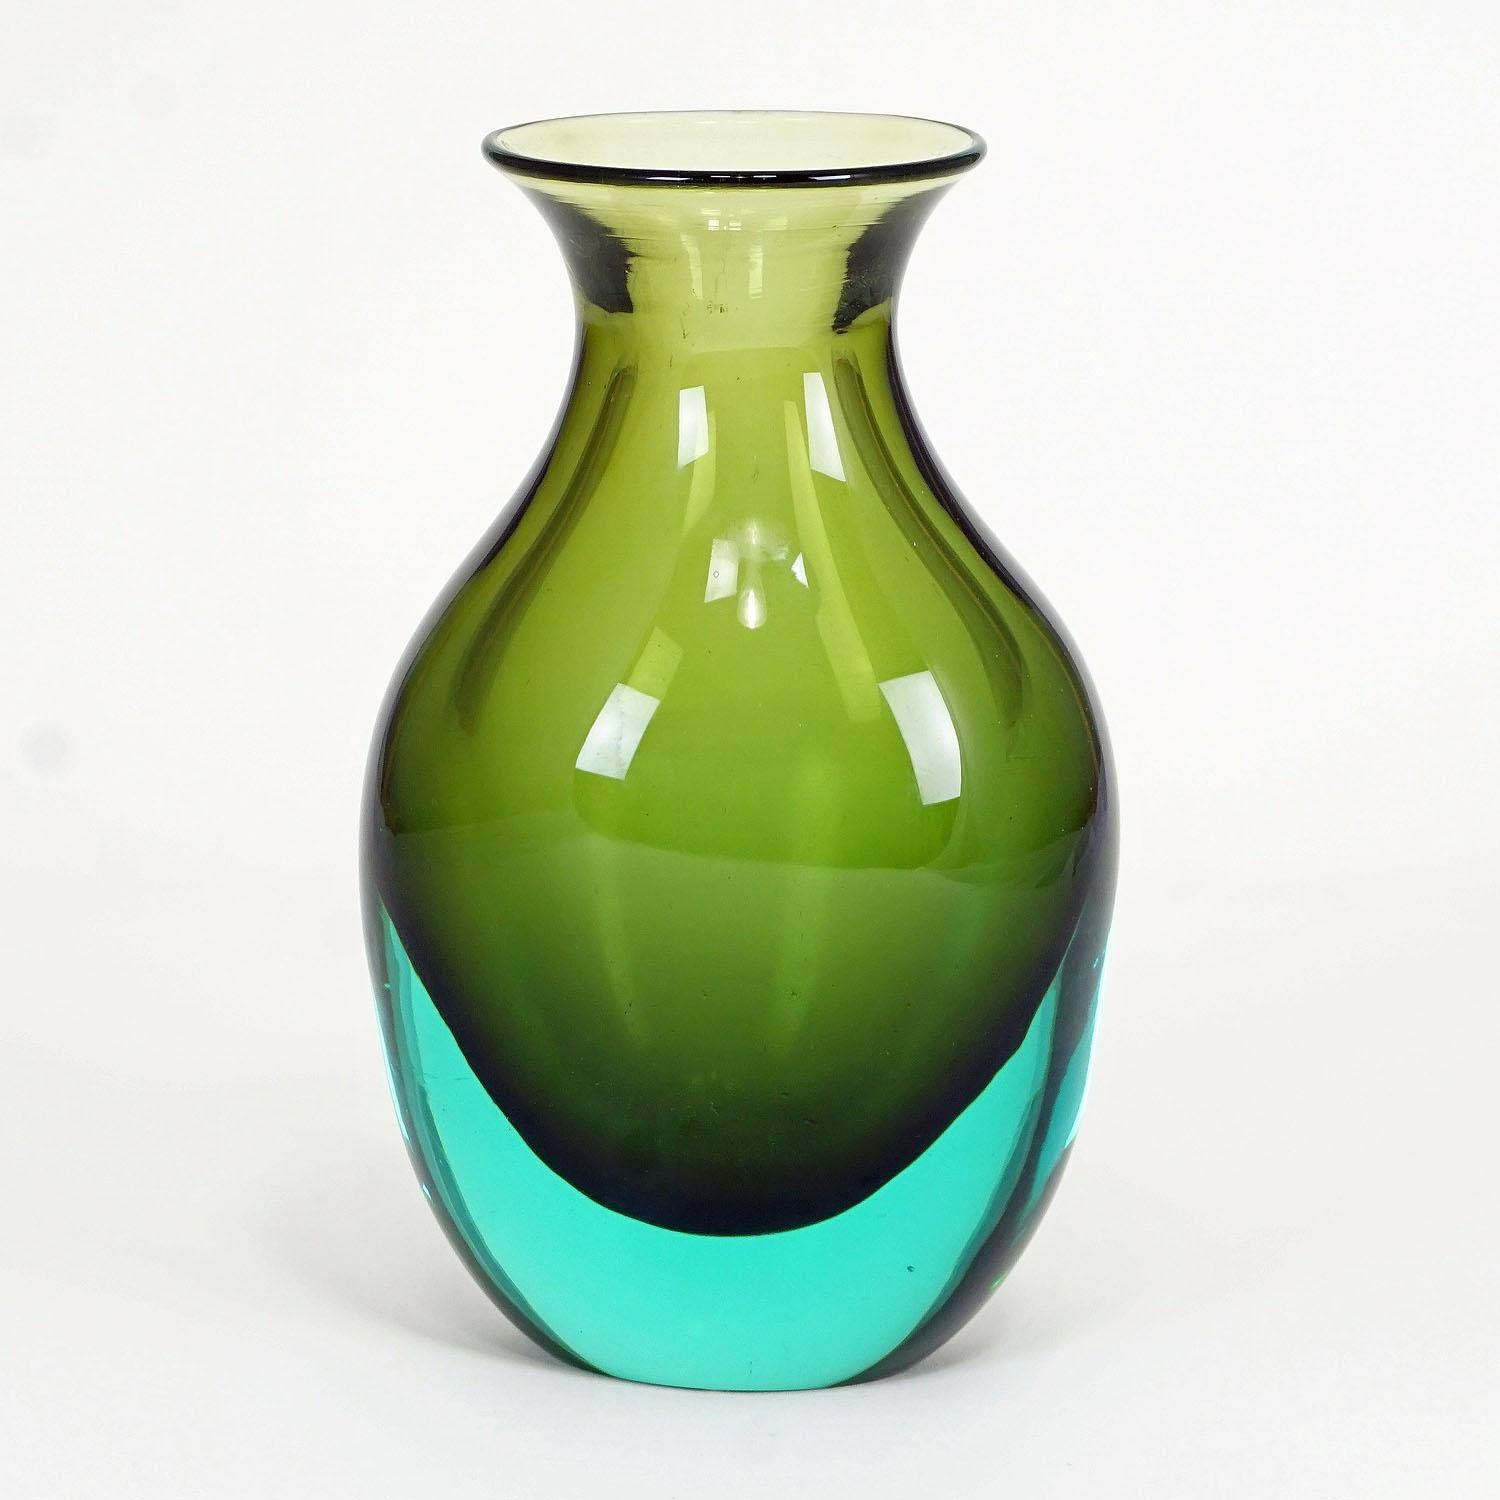 A nice Murano glass vase manufactured by vetreria Gino Cenedese and designed by Antonio da Ros in the 1960ties. green and turquoise Sommerso glass.

Measures: Width 4.33